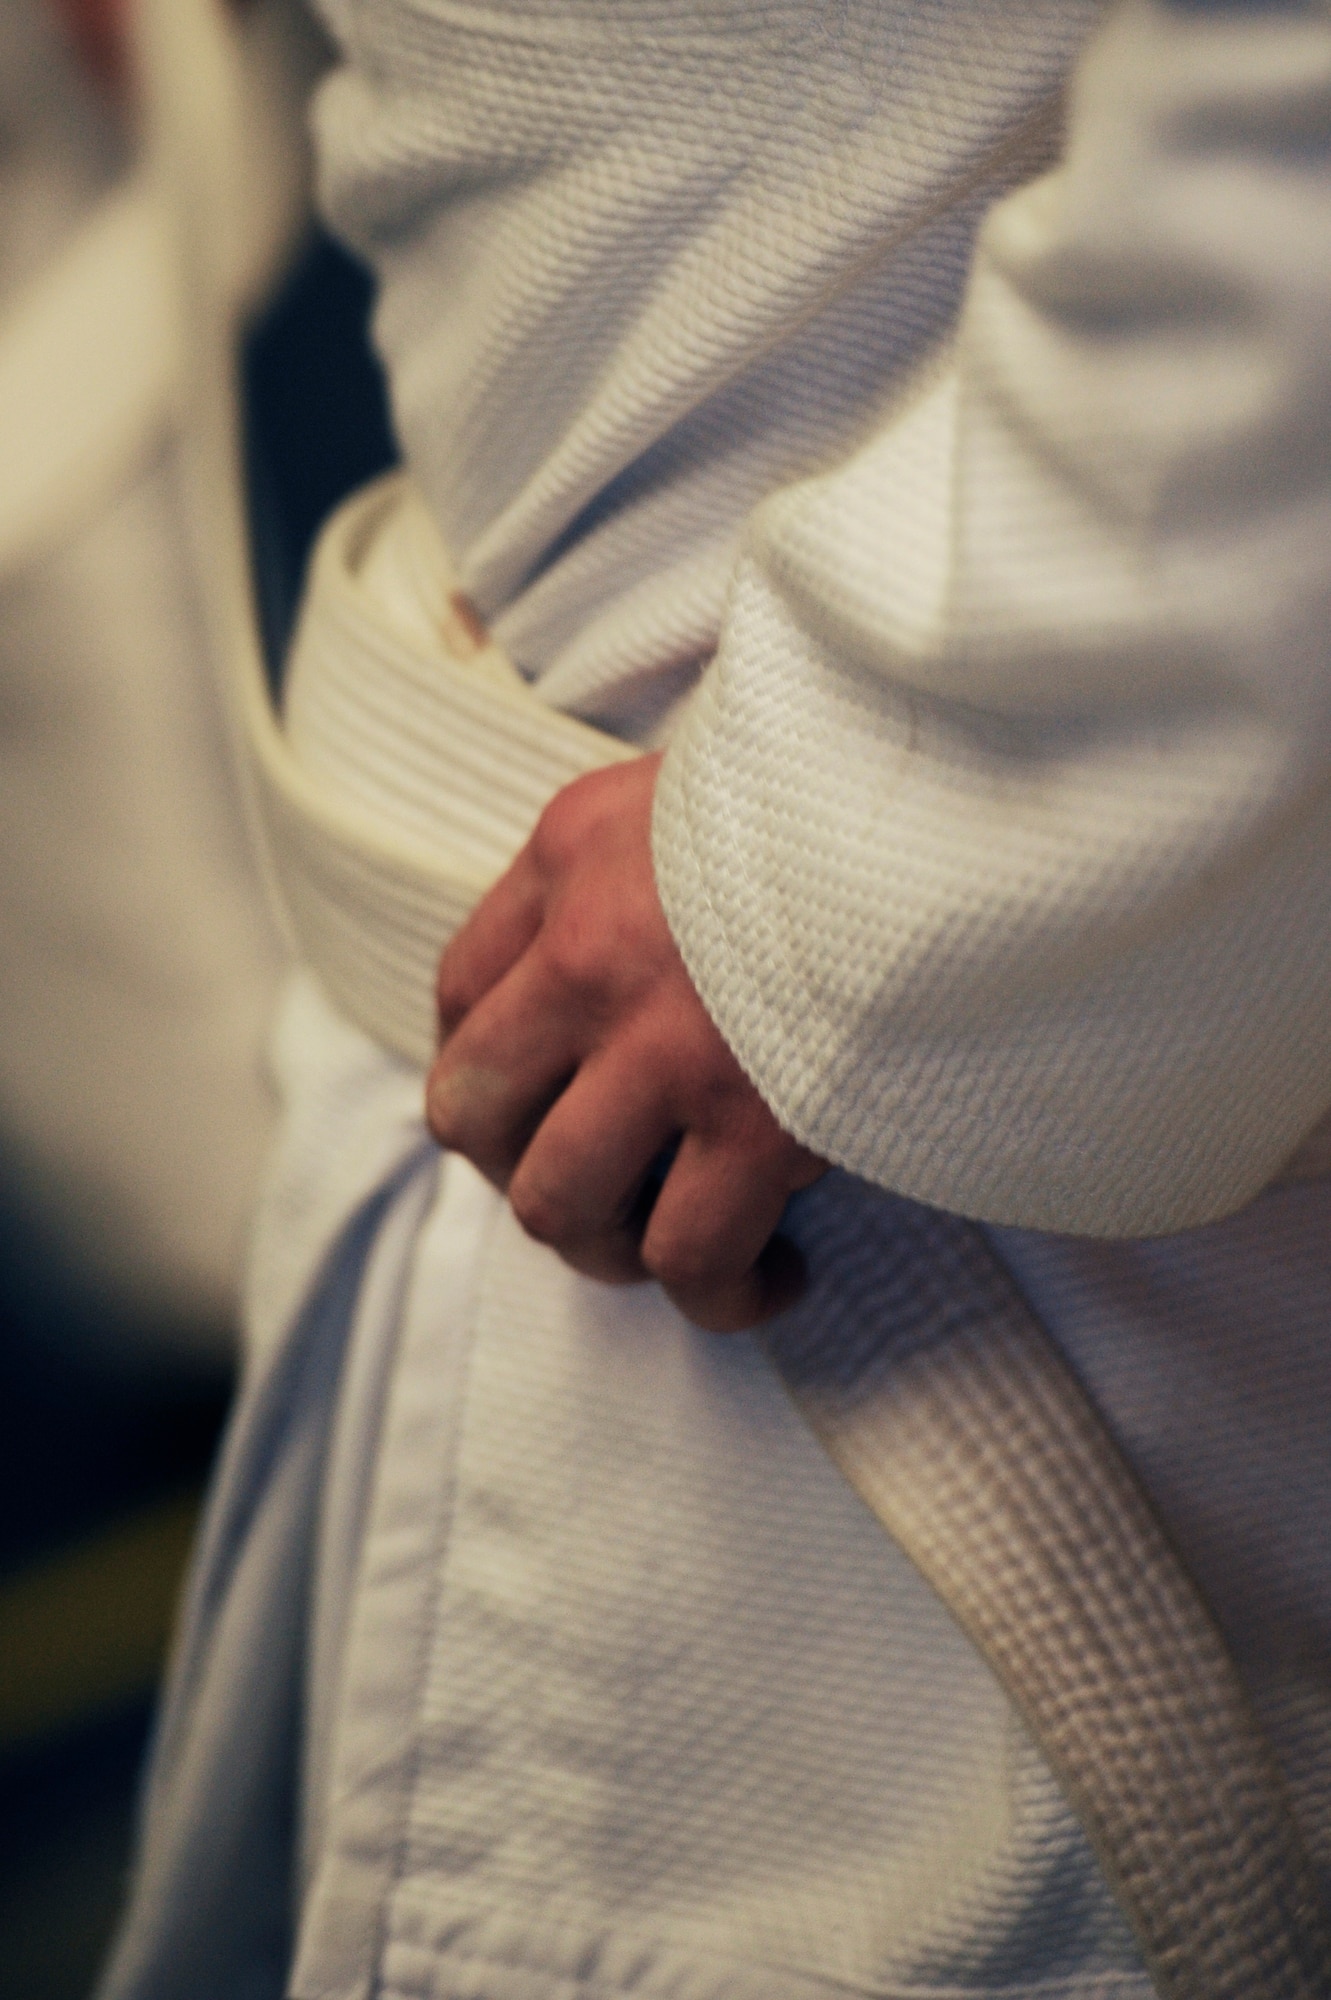 A student of the Brazilian Jiu-jitsu class ties his gi during a class Rhines Ordnance Barracks, Germany, Nov. 26, 2012. Students here go over different self-defense techniques. Many different people come through the class all with different skill levels.  Some people practice Jujitsu for the technique, others for fitness or even just for self-defense. Classes are every Monday and Wednesday at 6 p.m. to 8 p.m. (U.S. Air Force photo/ Senior Airman Aaron-Forrest Wainwright)